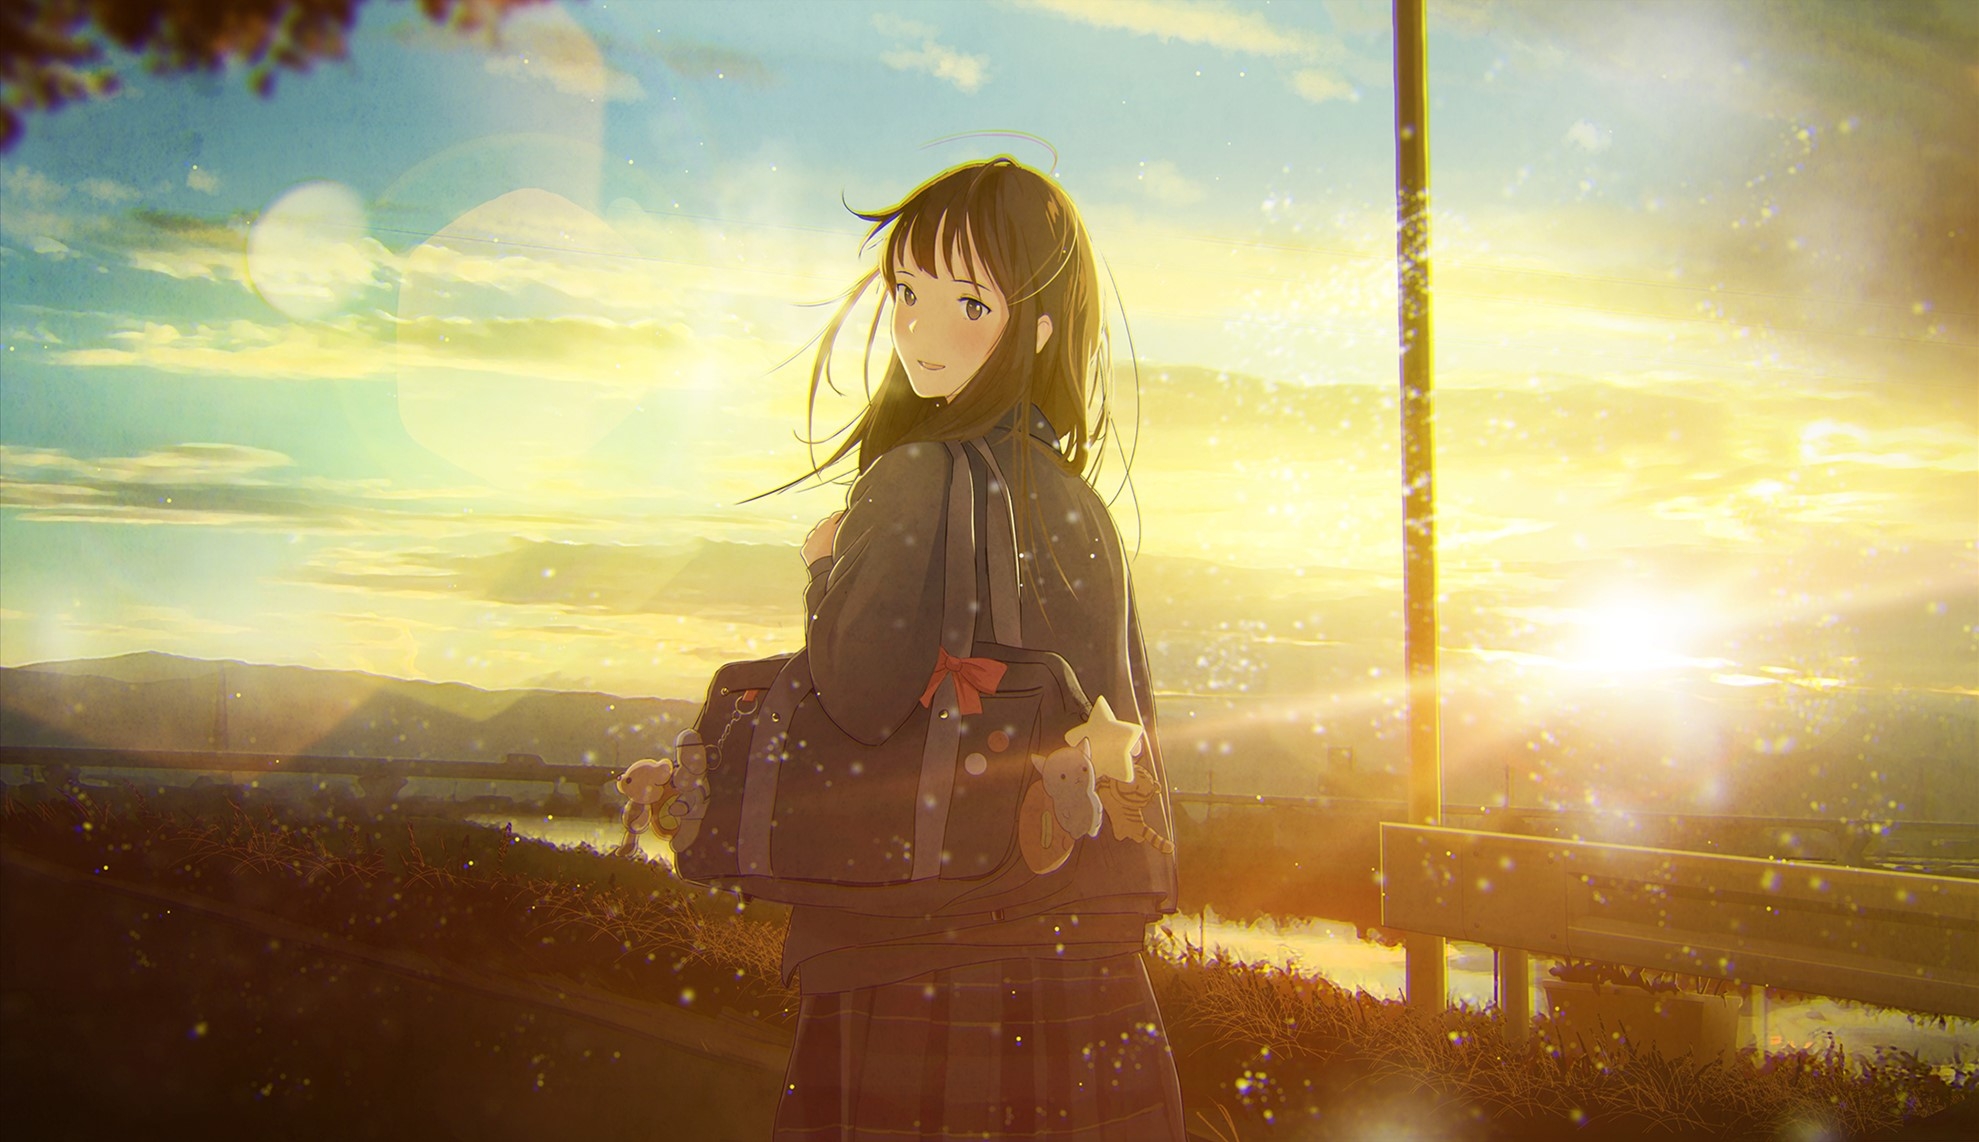 Wallpapers wallpaper anime school girl view from behind sun light on the desktop